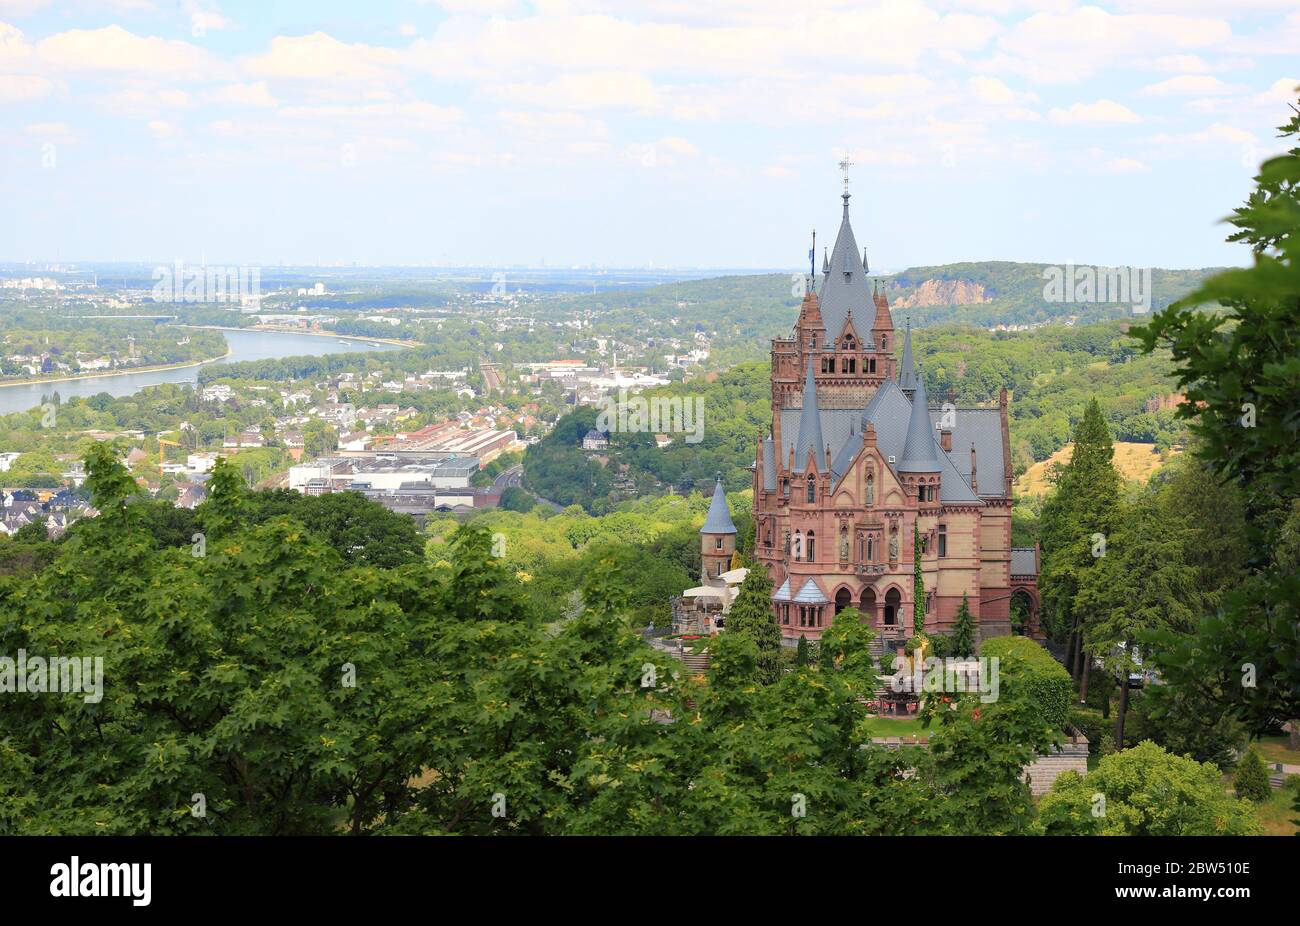 Drachenburg Castle, Rhine valley and the city of Bonn. Germany, Europe. Stock Photo